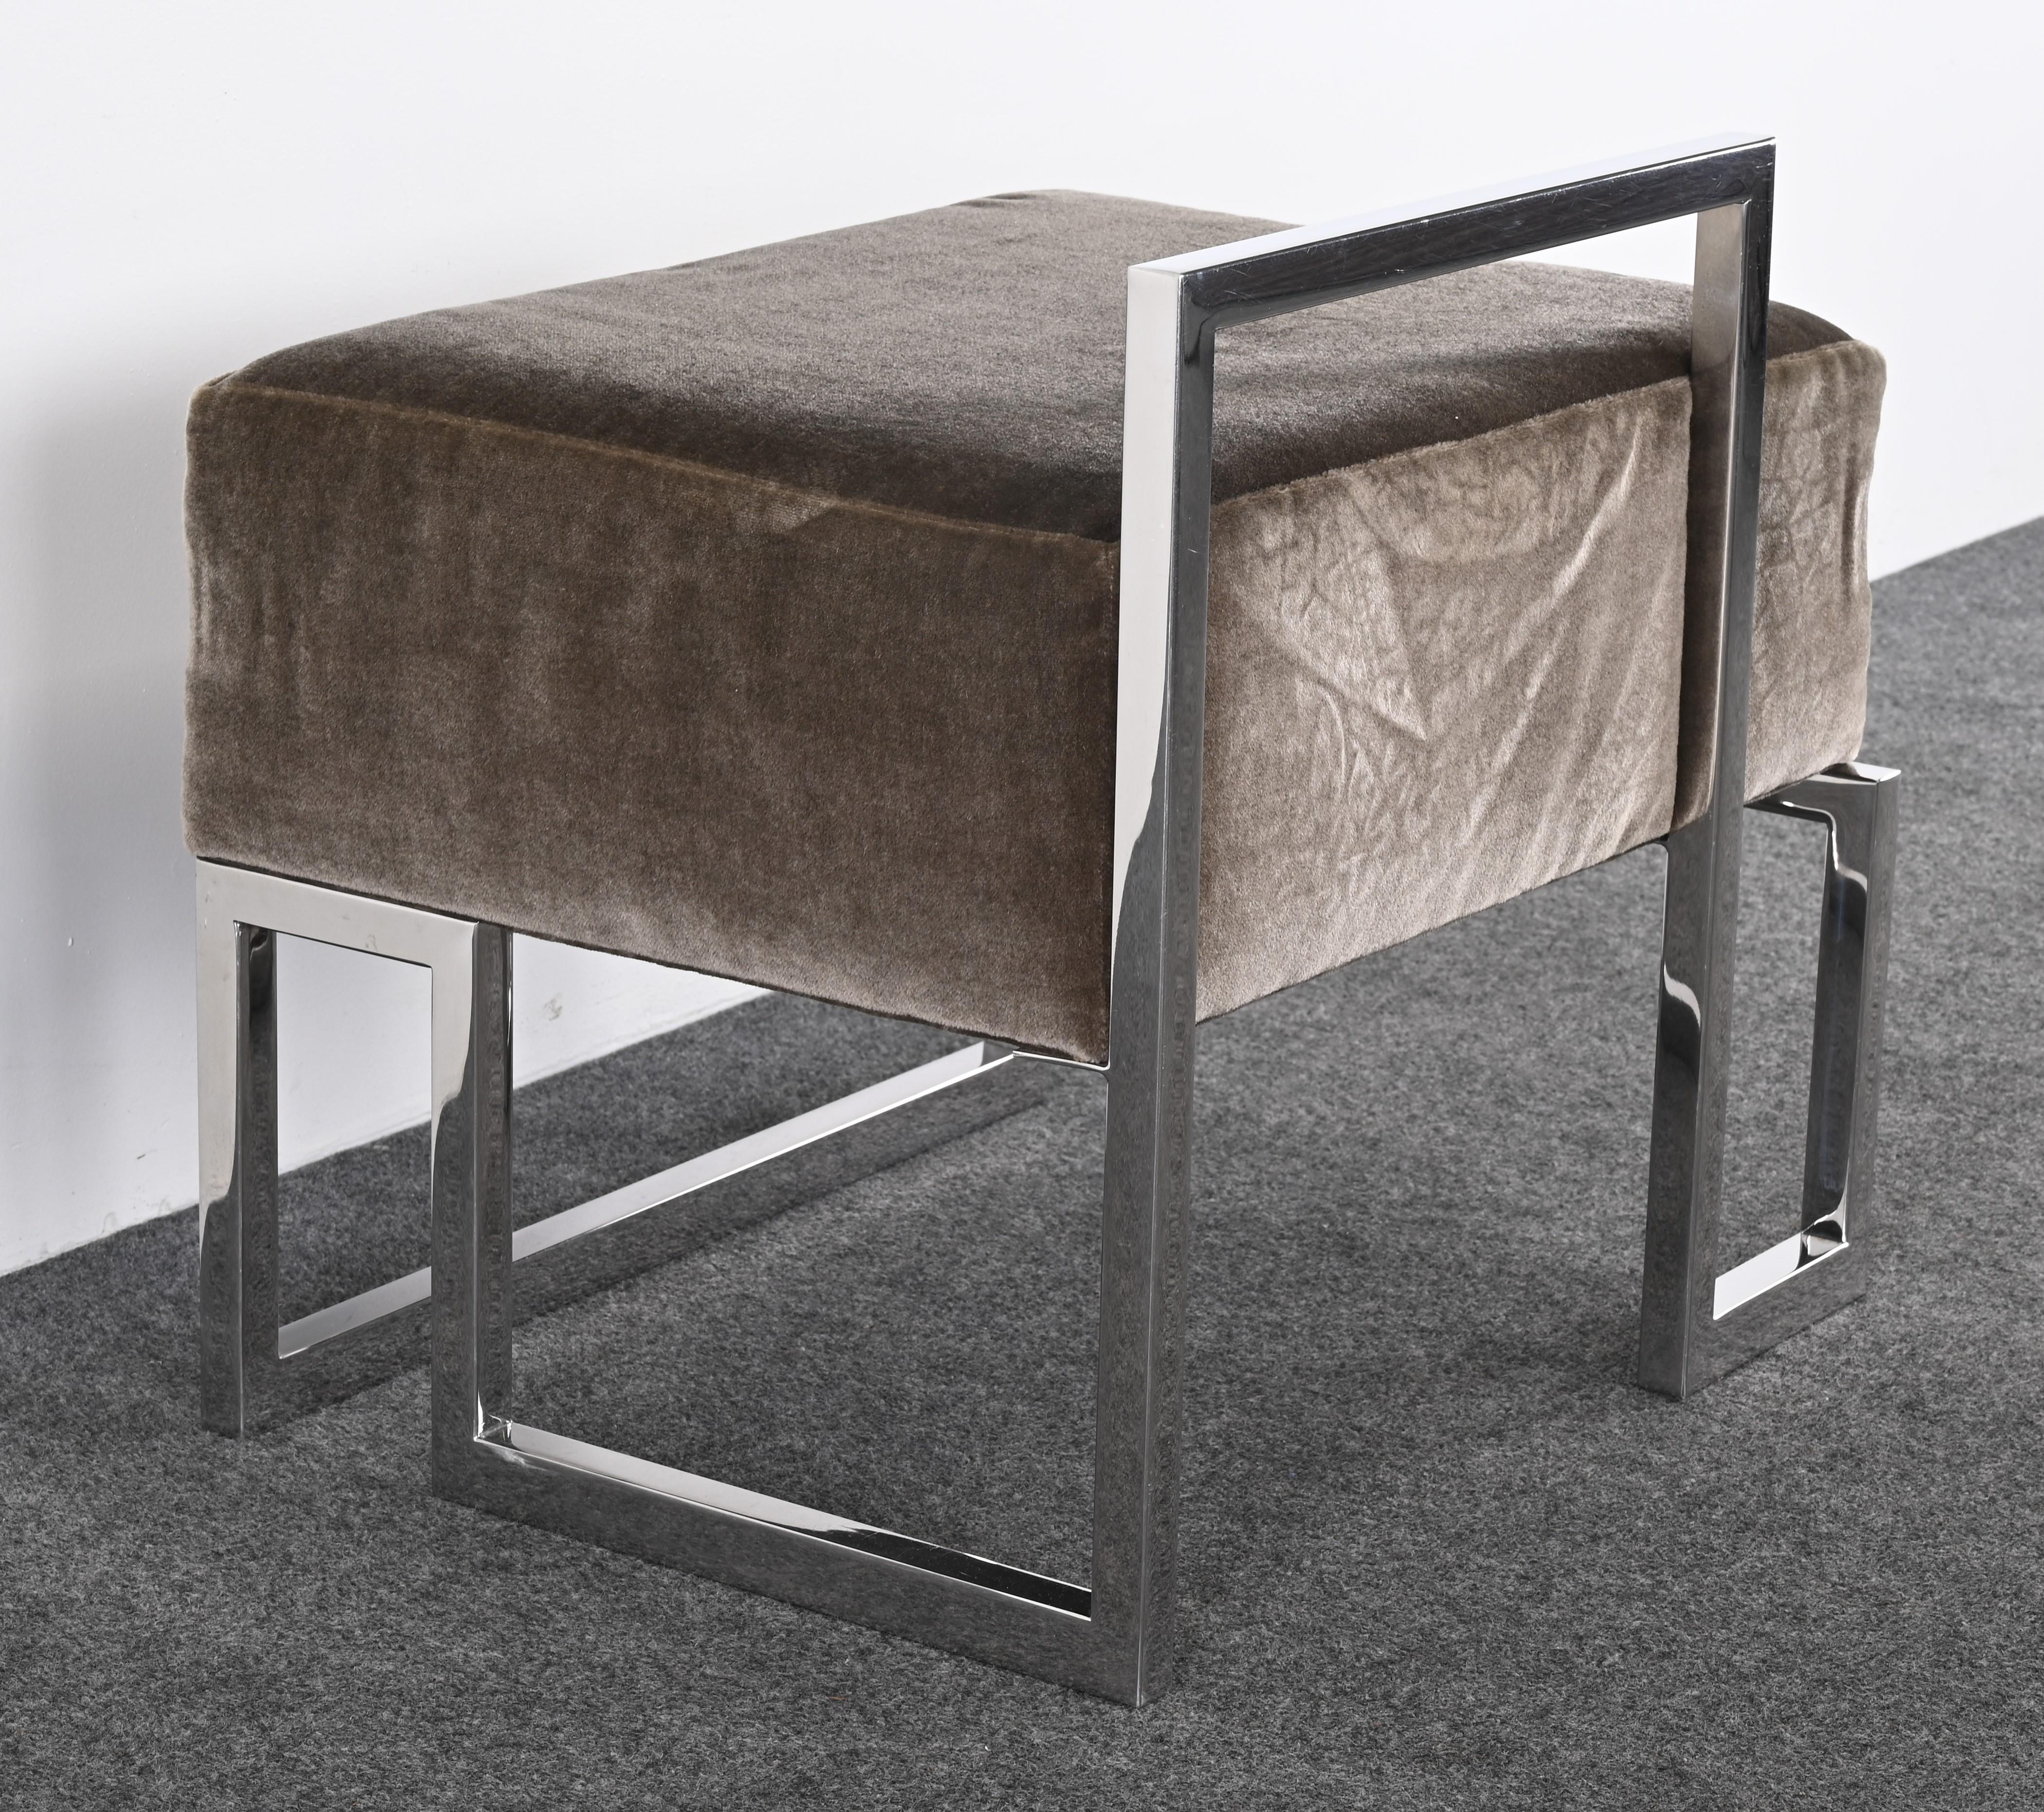 Stainless Steel Bench by Vladimir Kagan for Gucci, 1990s For Sale 1